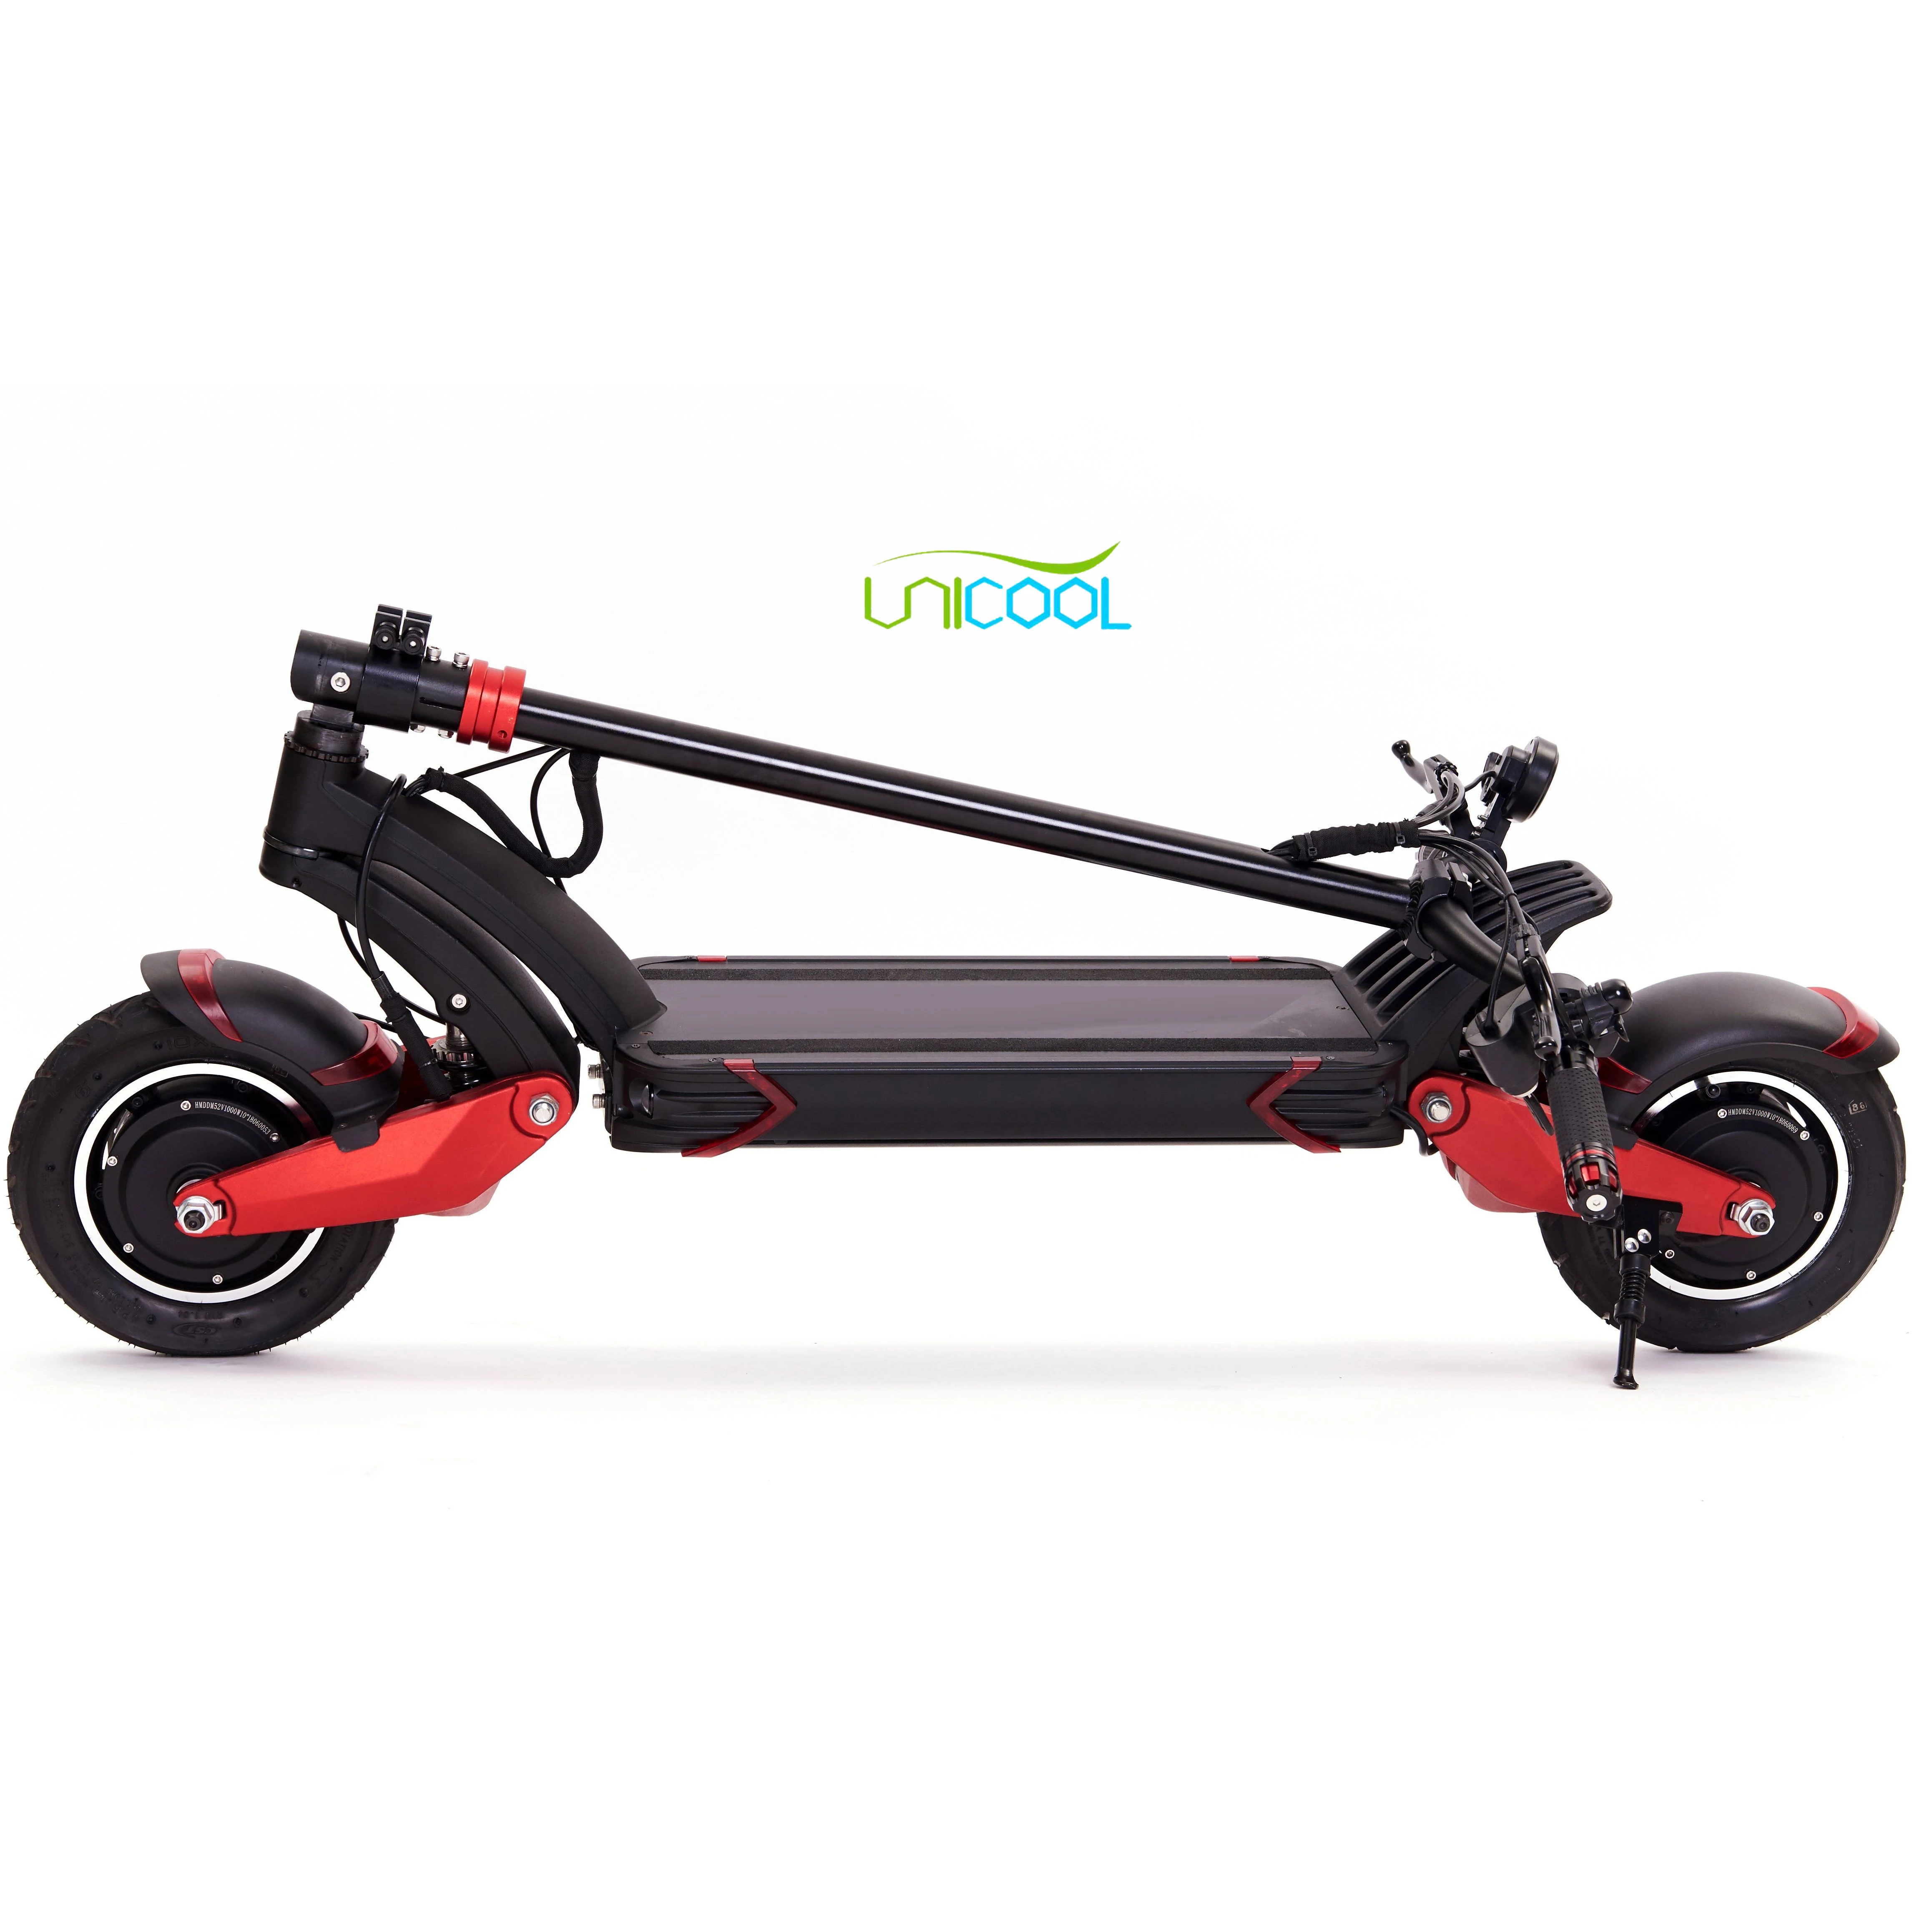 

Unicool e skuter elektryczny electric best price/performance ratio scooter better than mantis pro and thunder